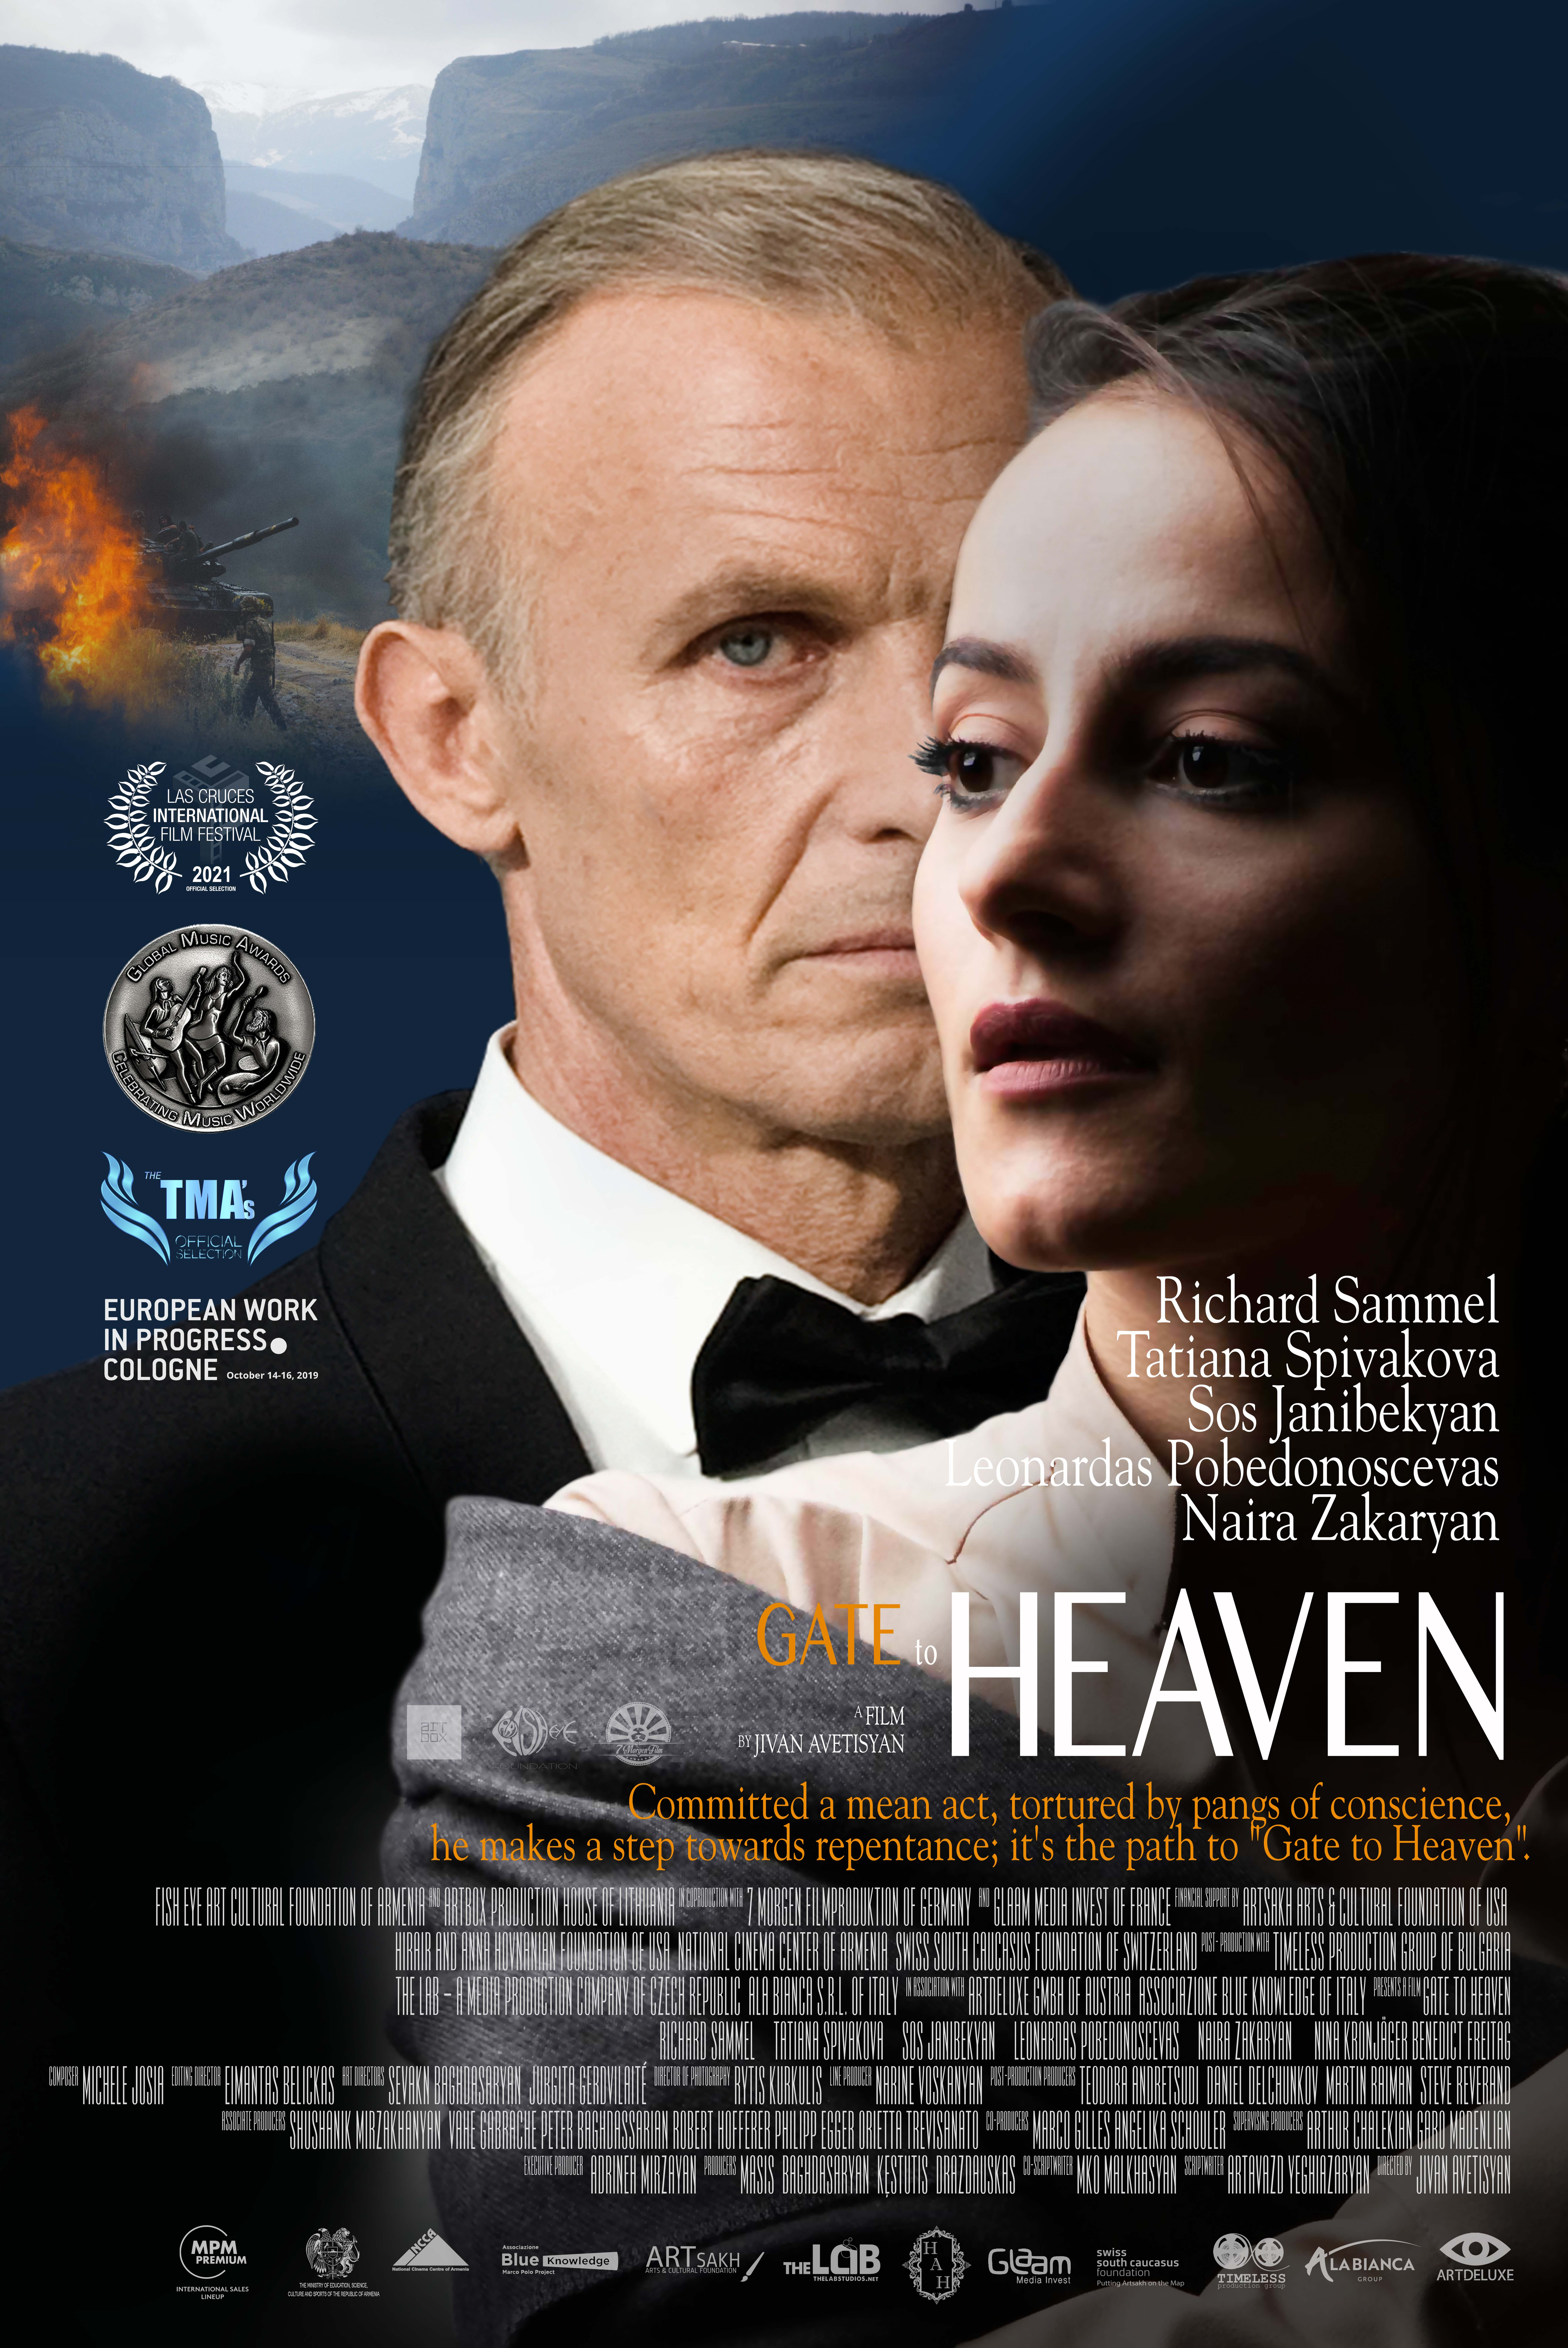 East Coast Premiere of "GATE TO HEAVEN" and Discussion with Filmmaker JIVAN AVETISYAN